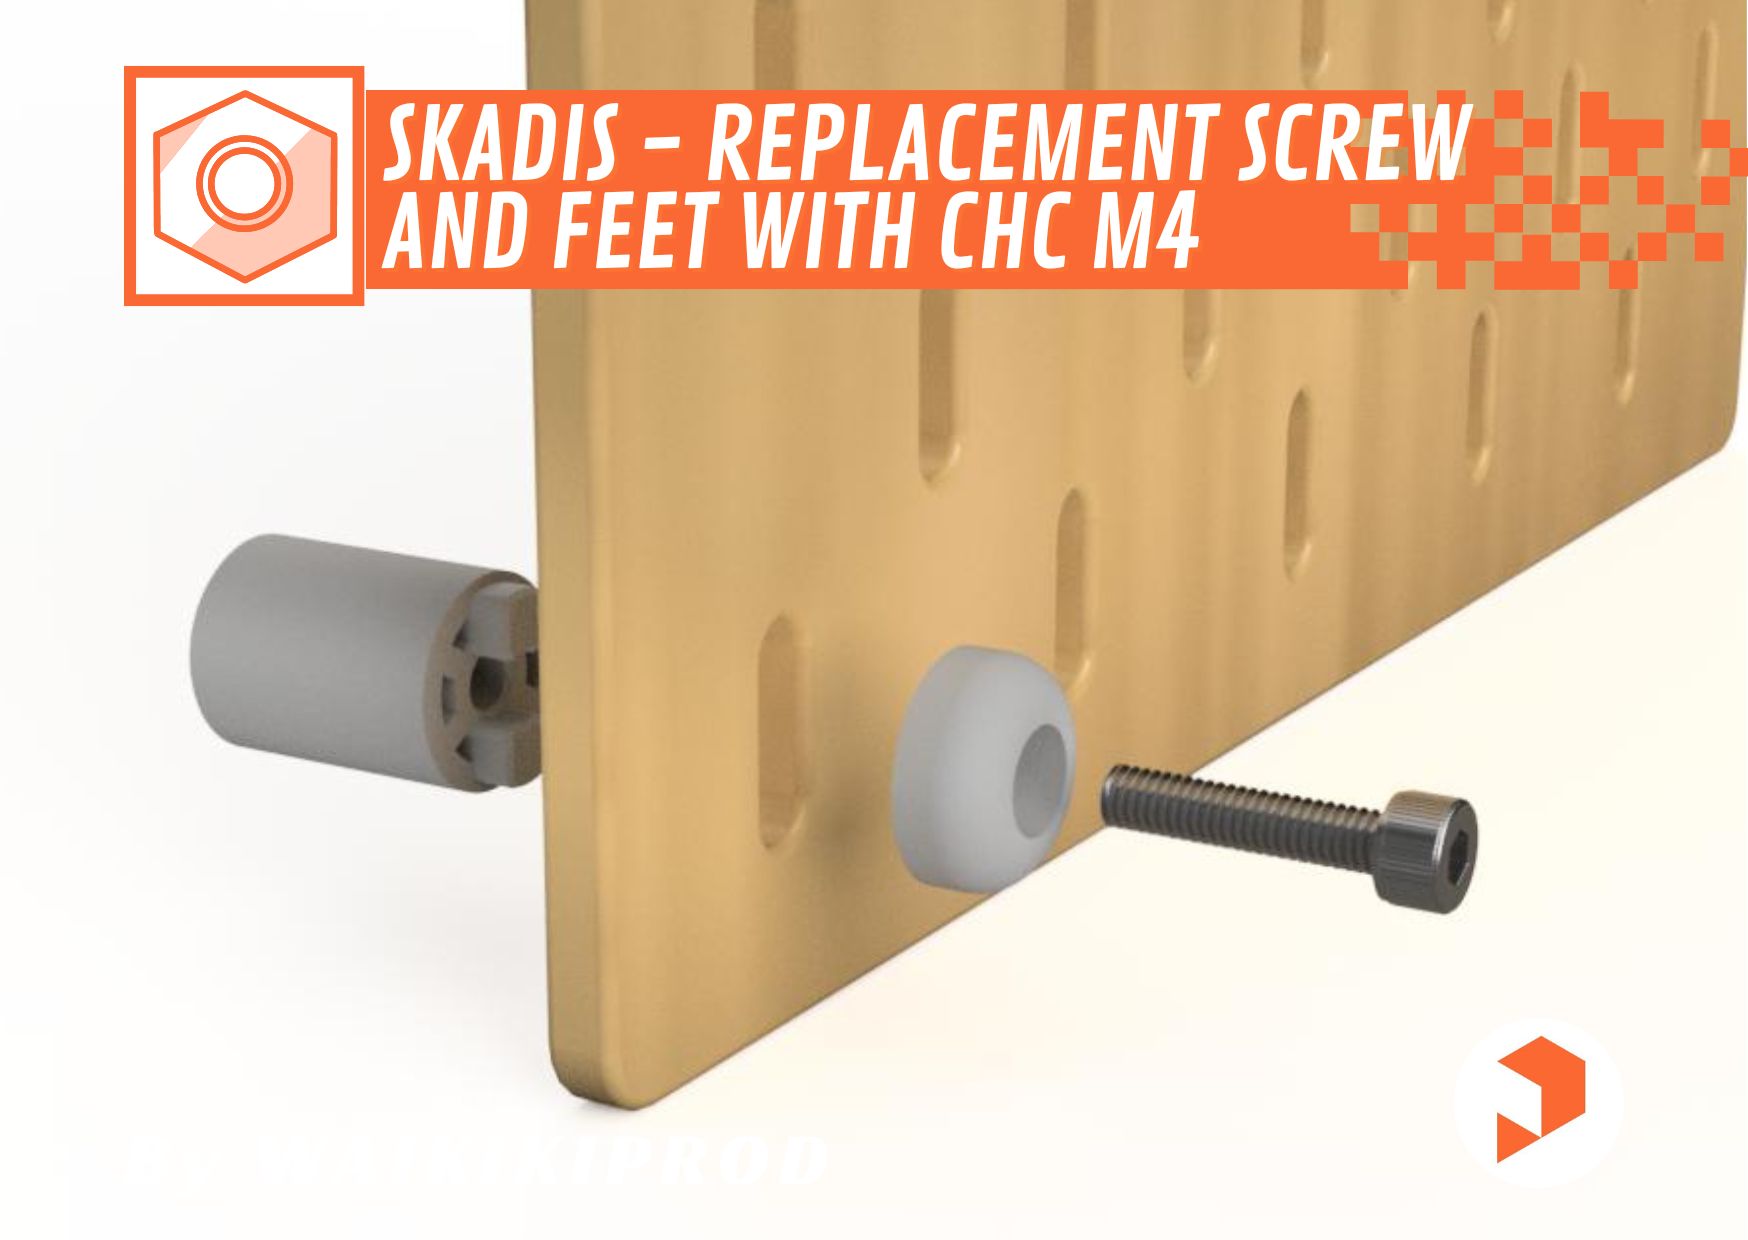 SKADIS - Replacement Screw and Feet with CHC M4